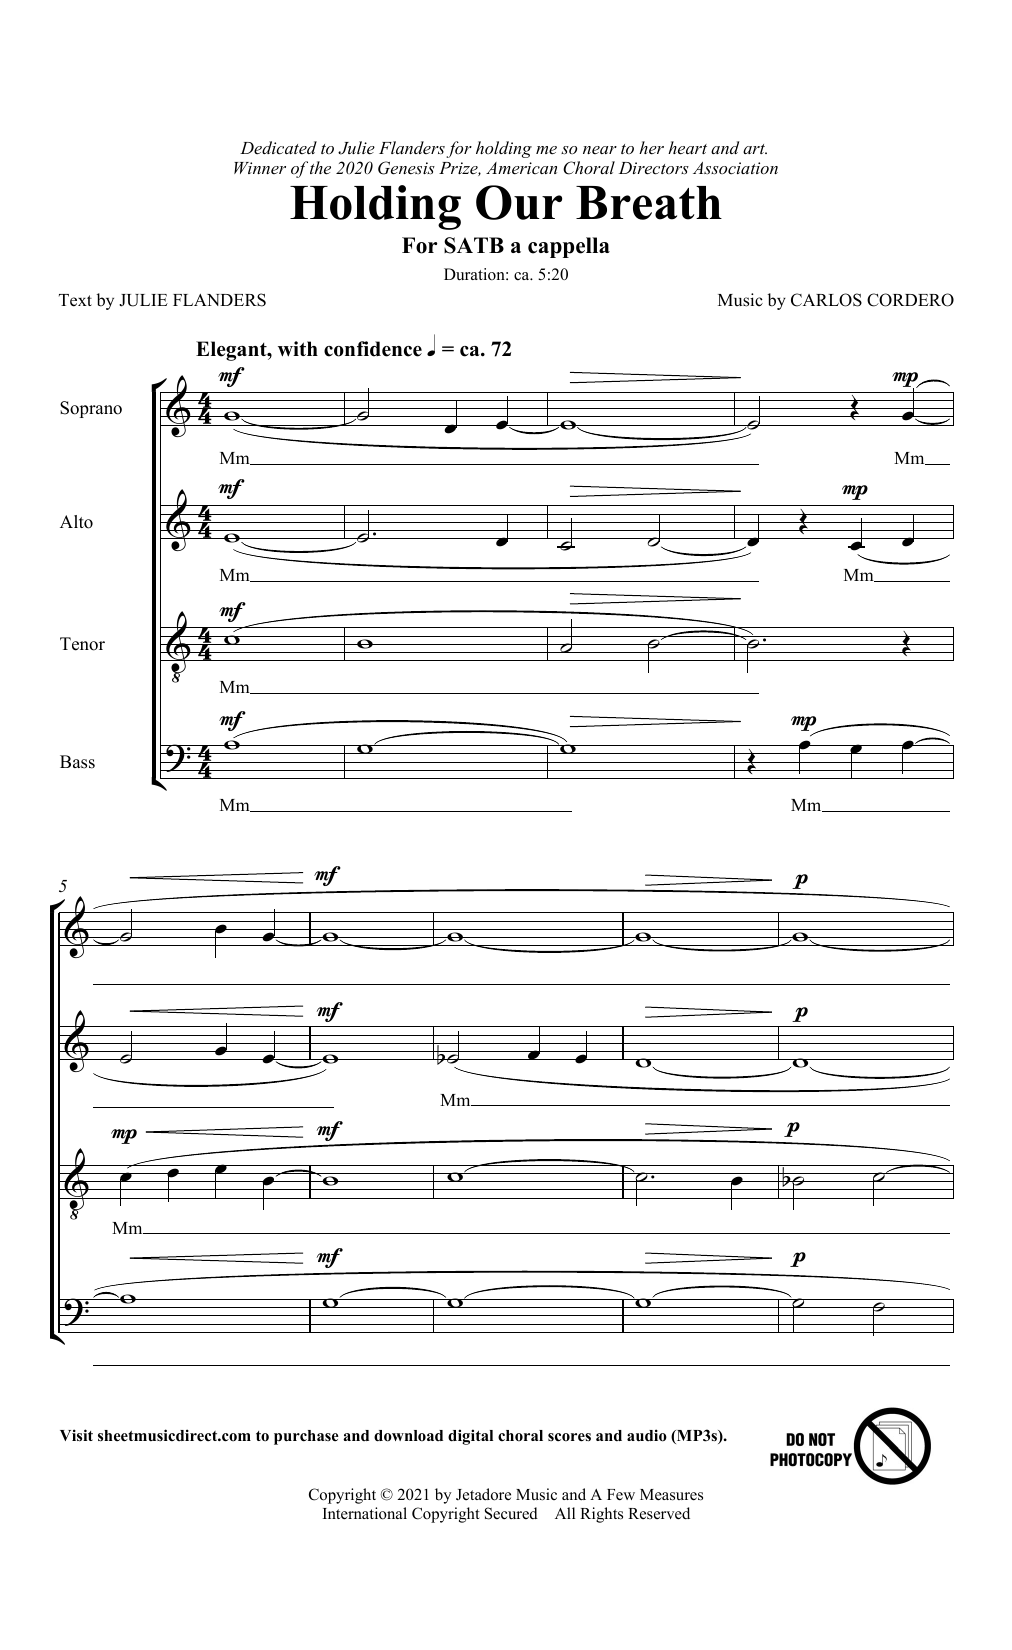 Download Julie Flanders and Carlos Cordero Holding Our Breath Sheet Music